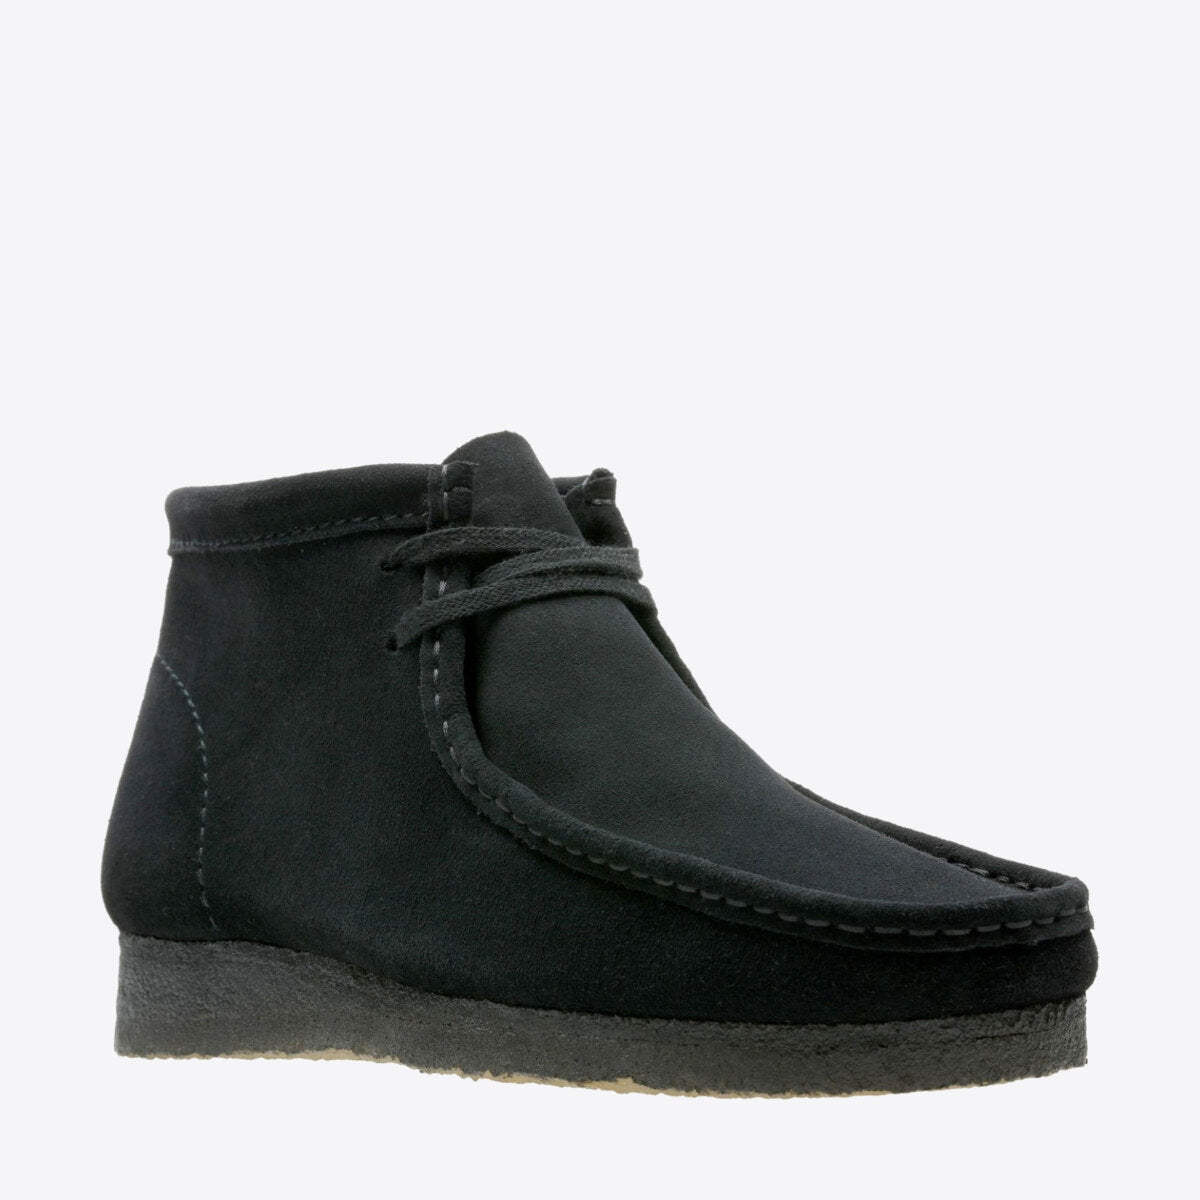 CLARKS Wallabee Boot Suede Black - Image 2